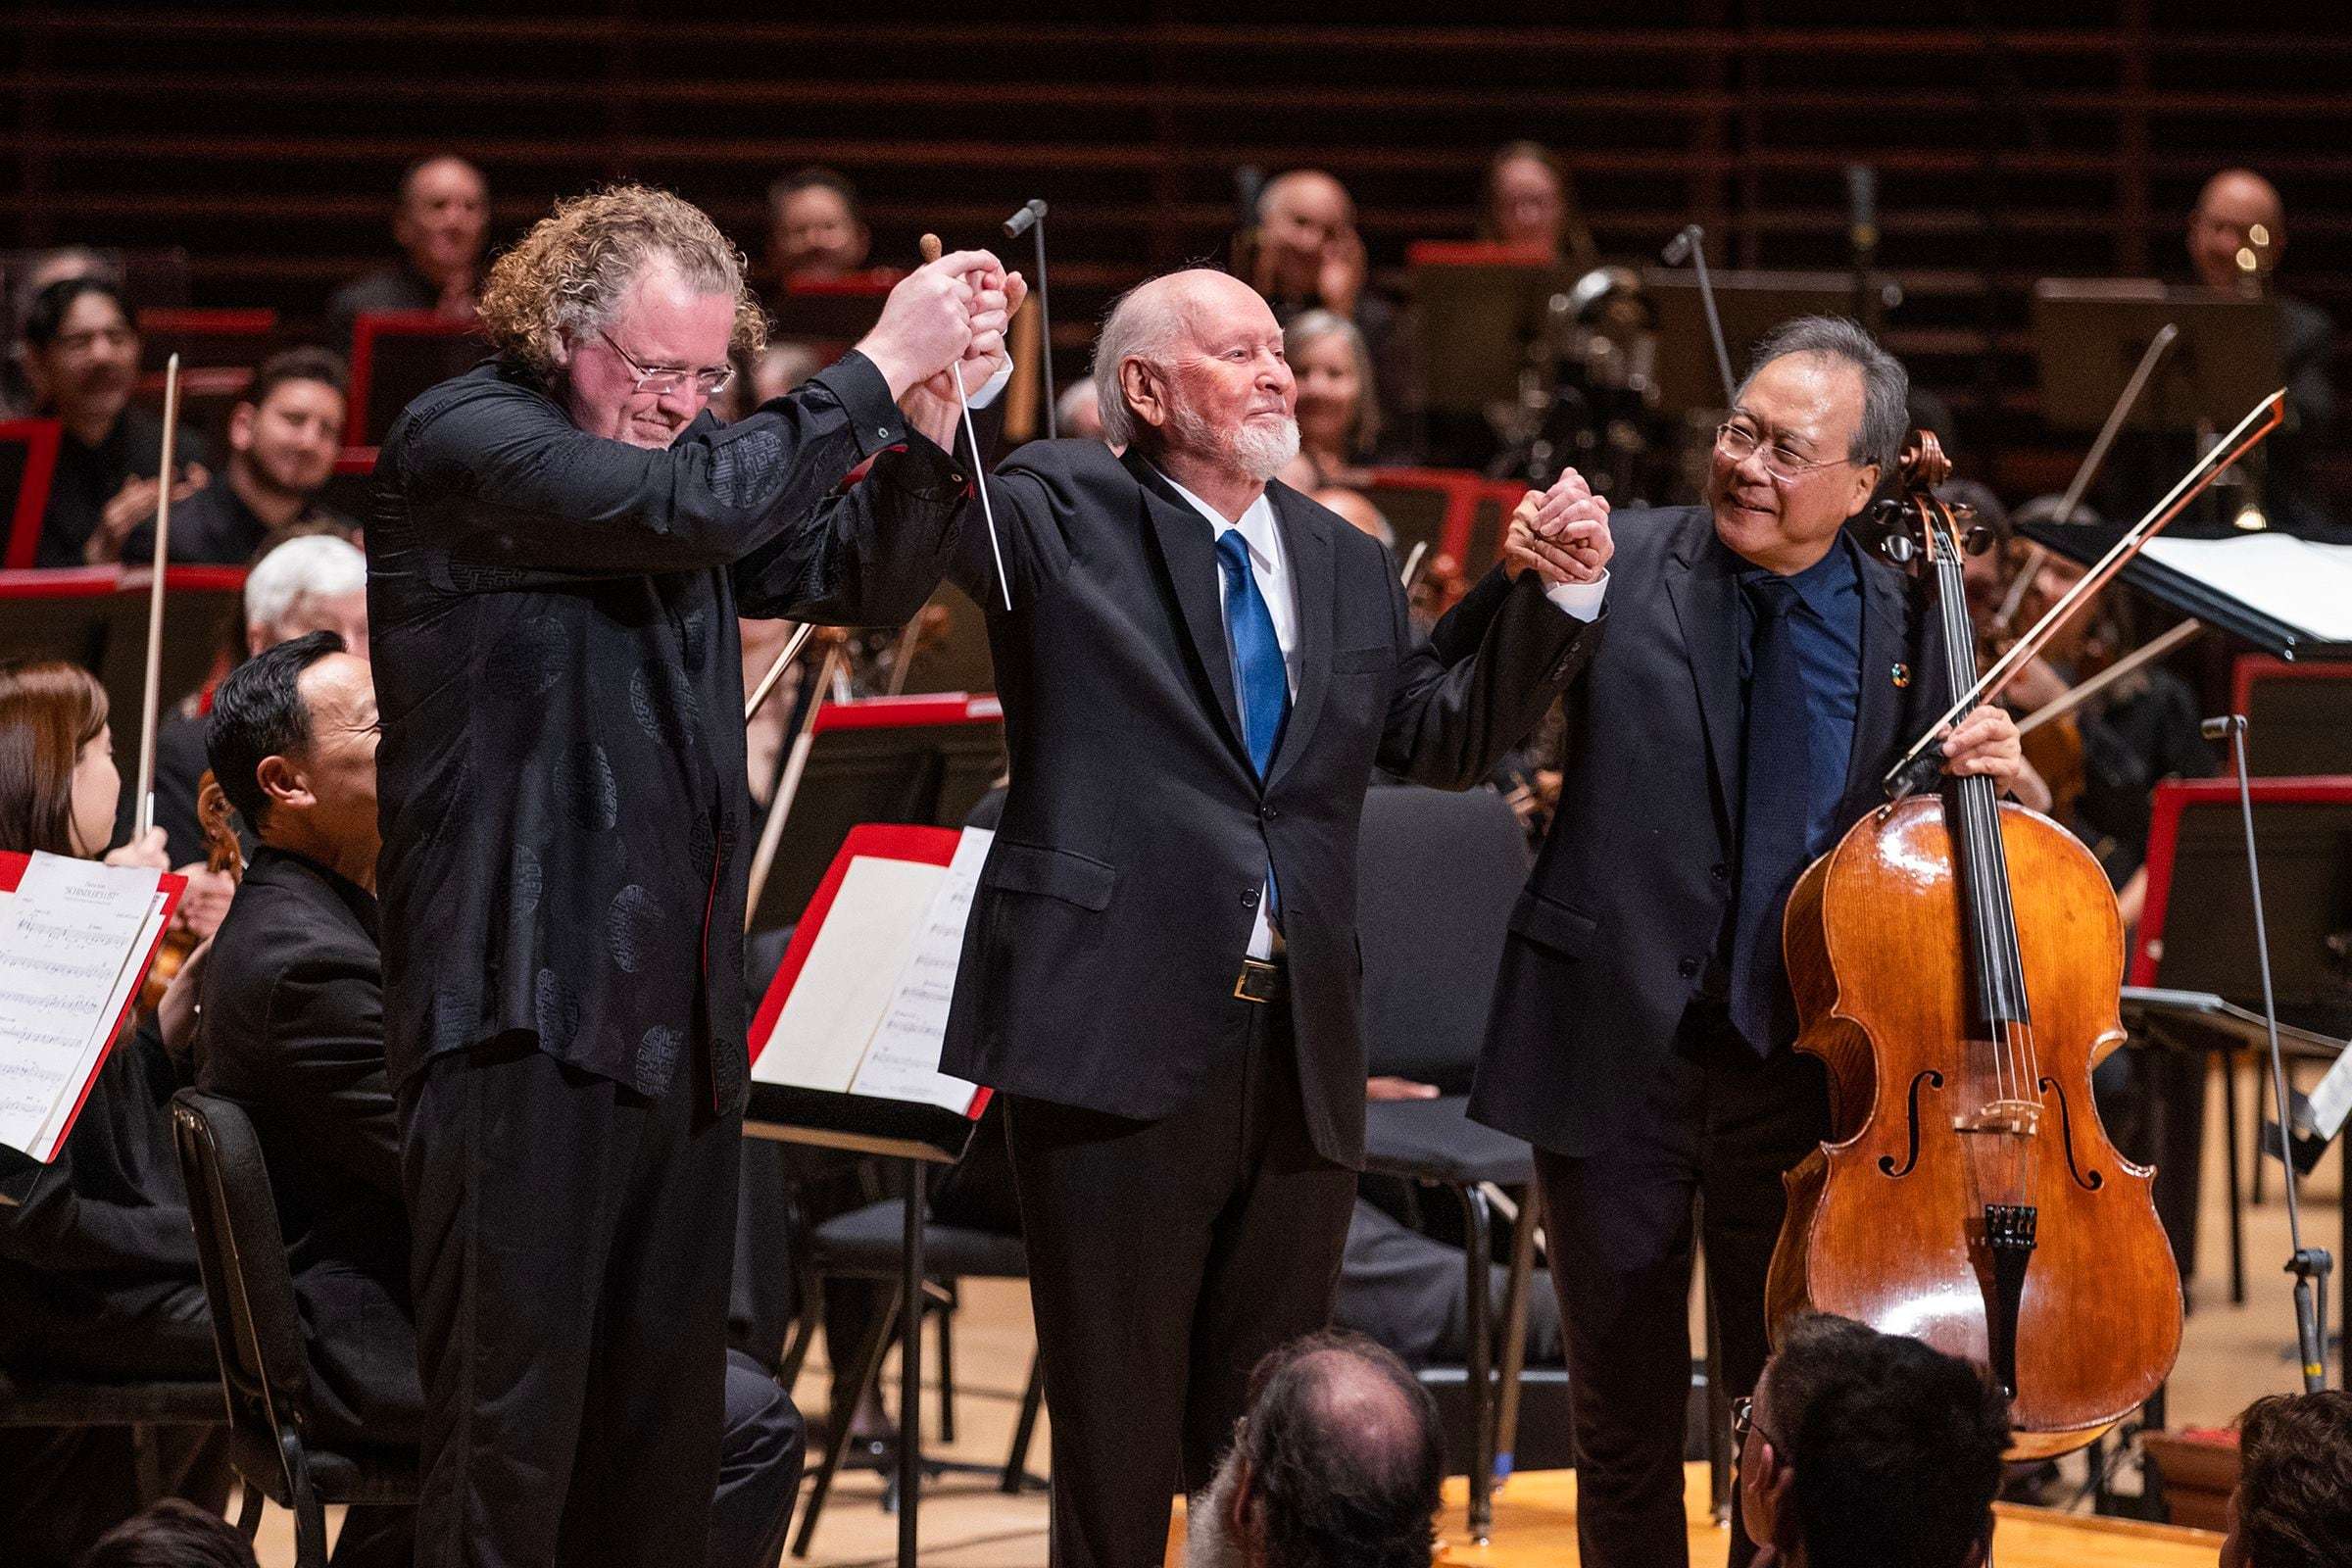 john williams conducted his own music at the kimmel. he wowed in a lot more than ‘star wars.’